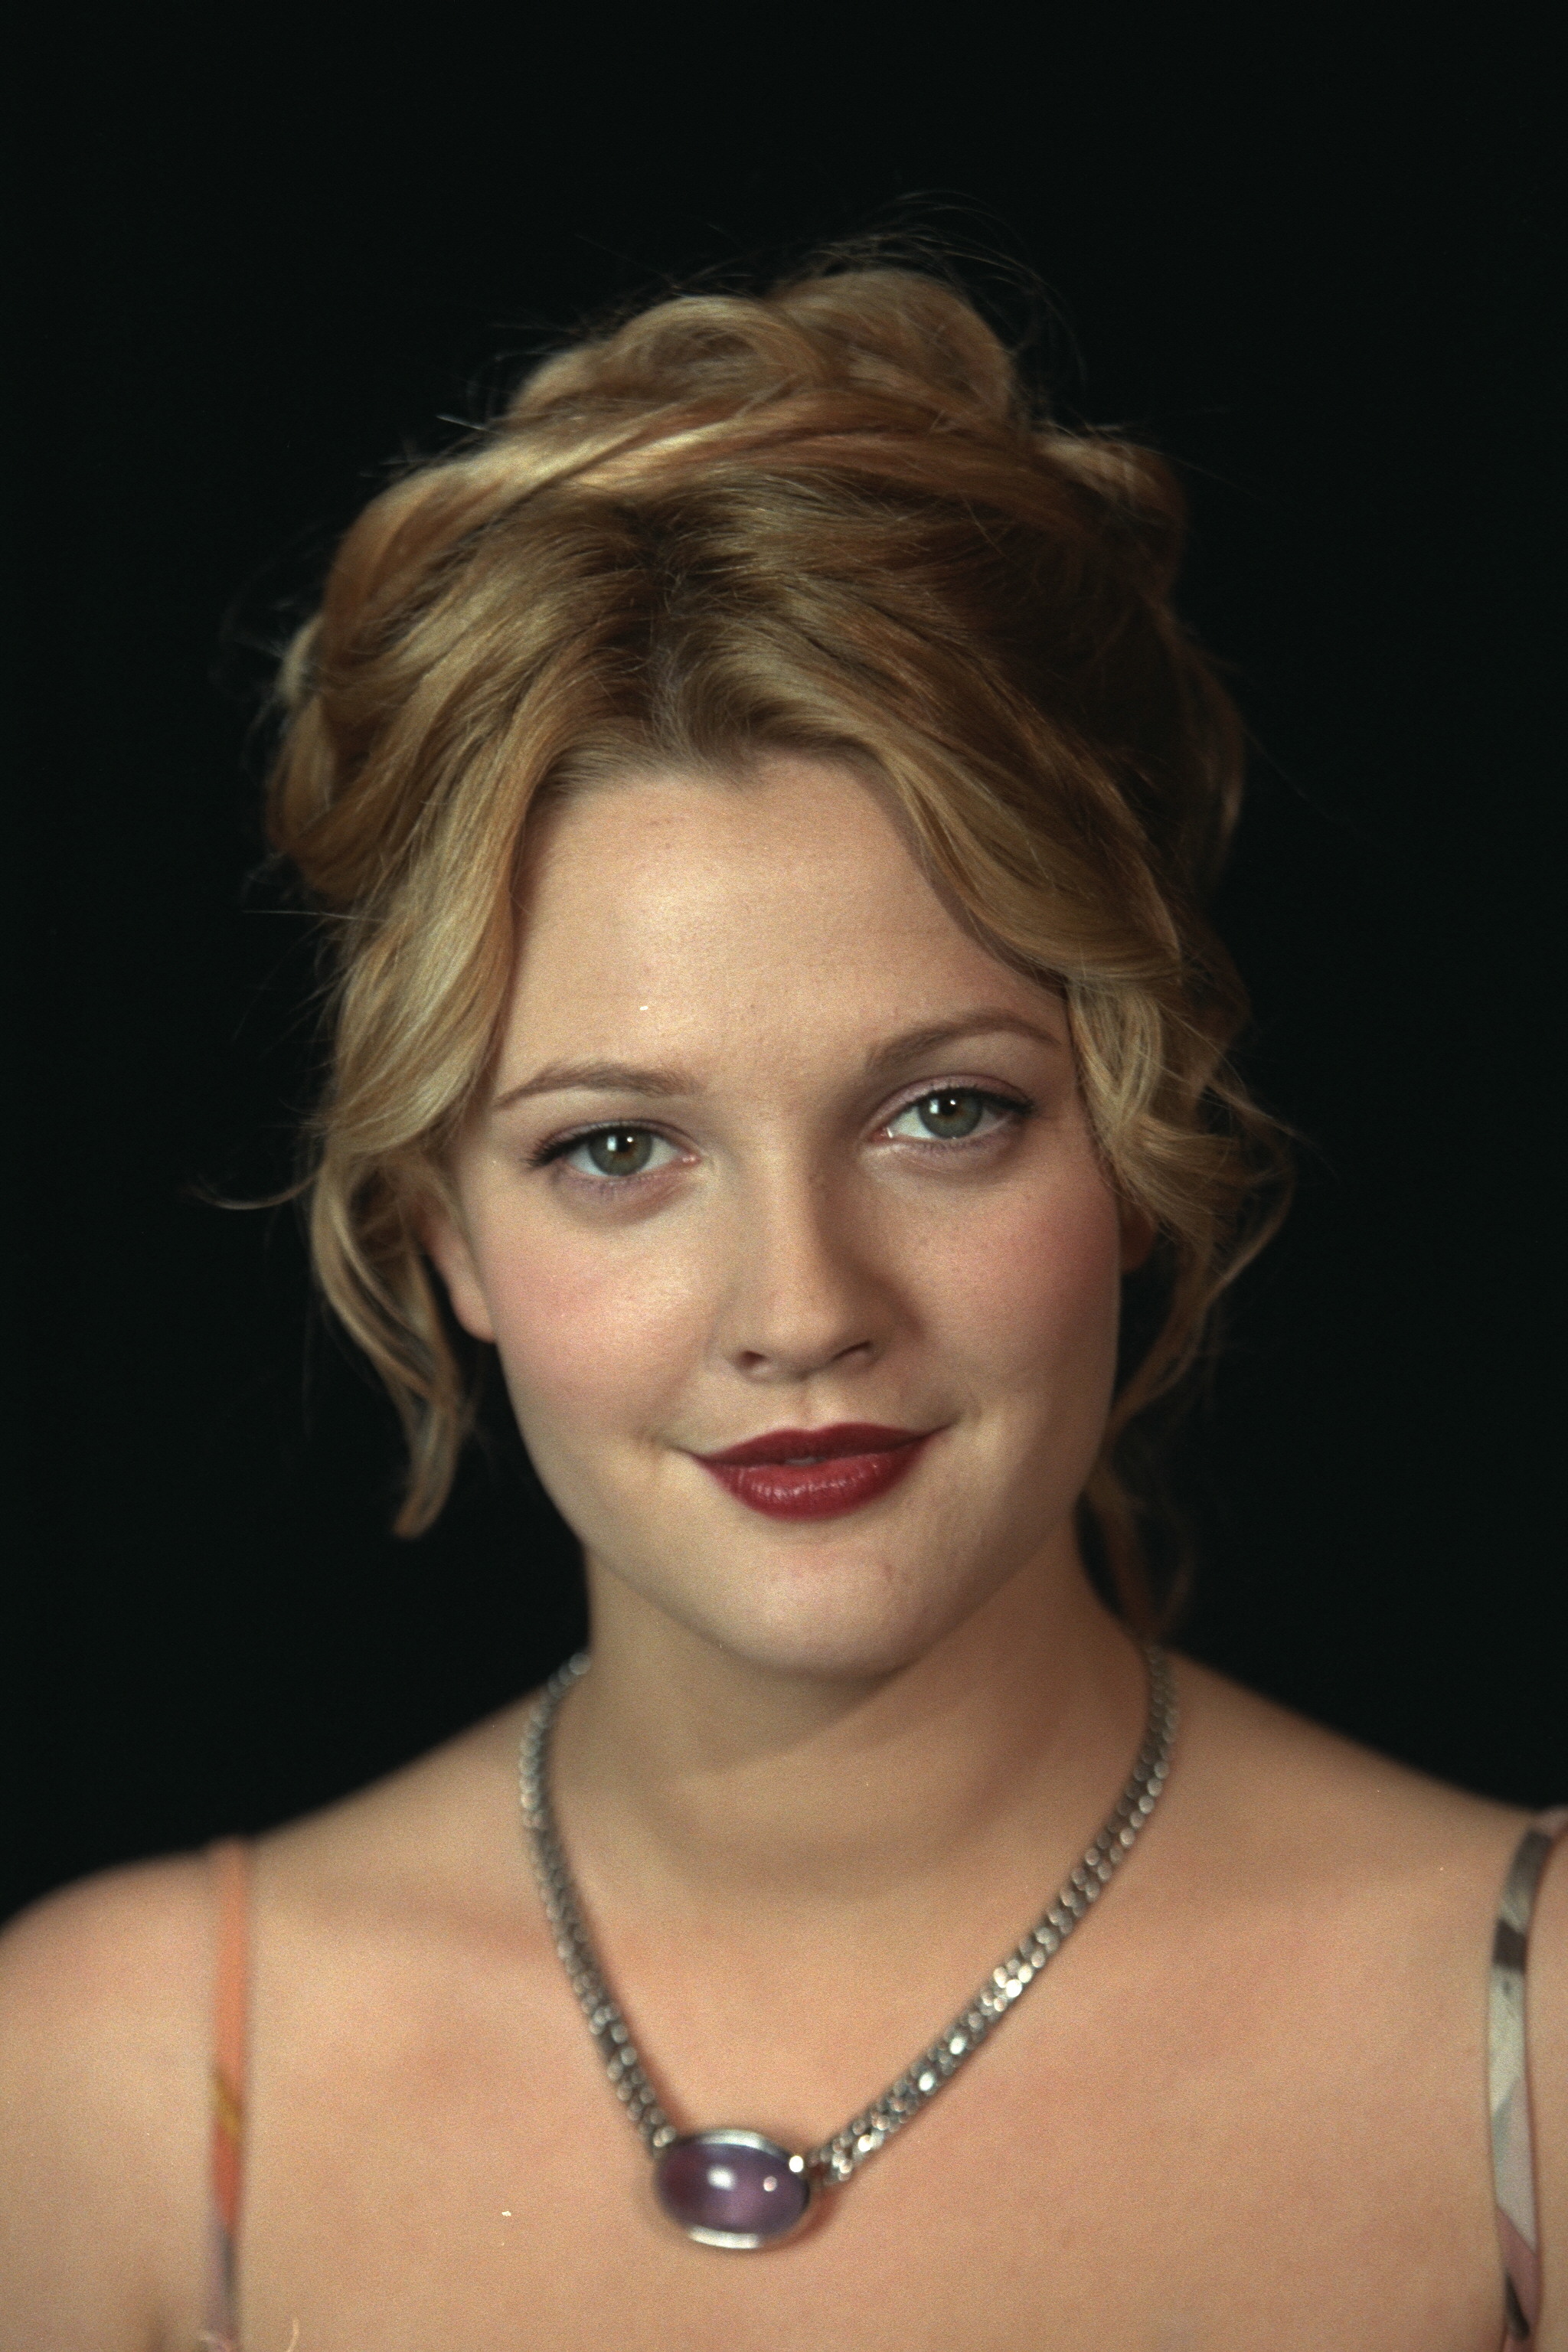 Drew Barrymore in the 1990s. | Source: Getty Images